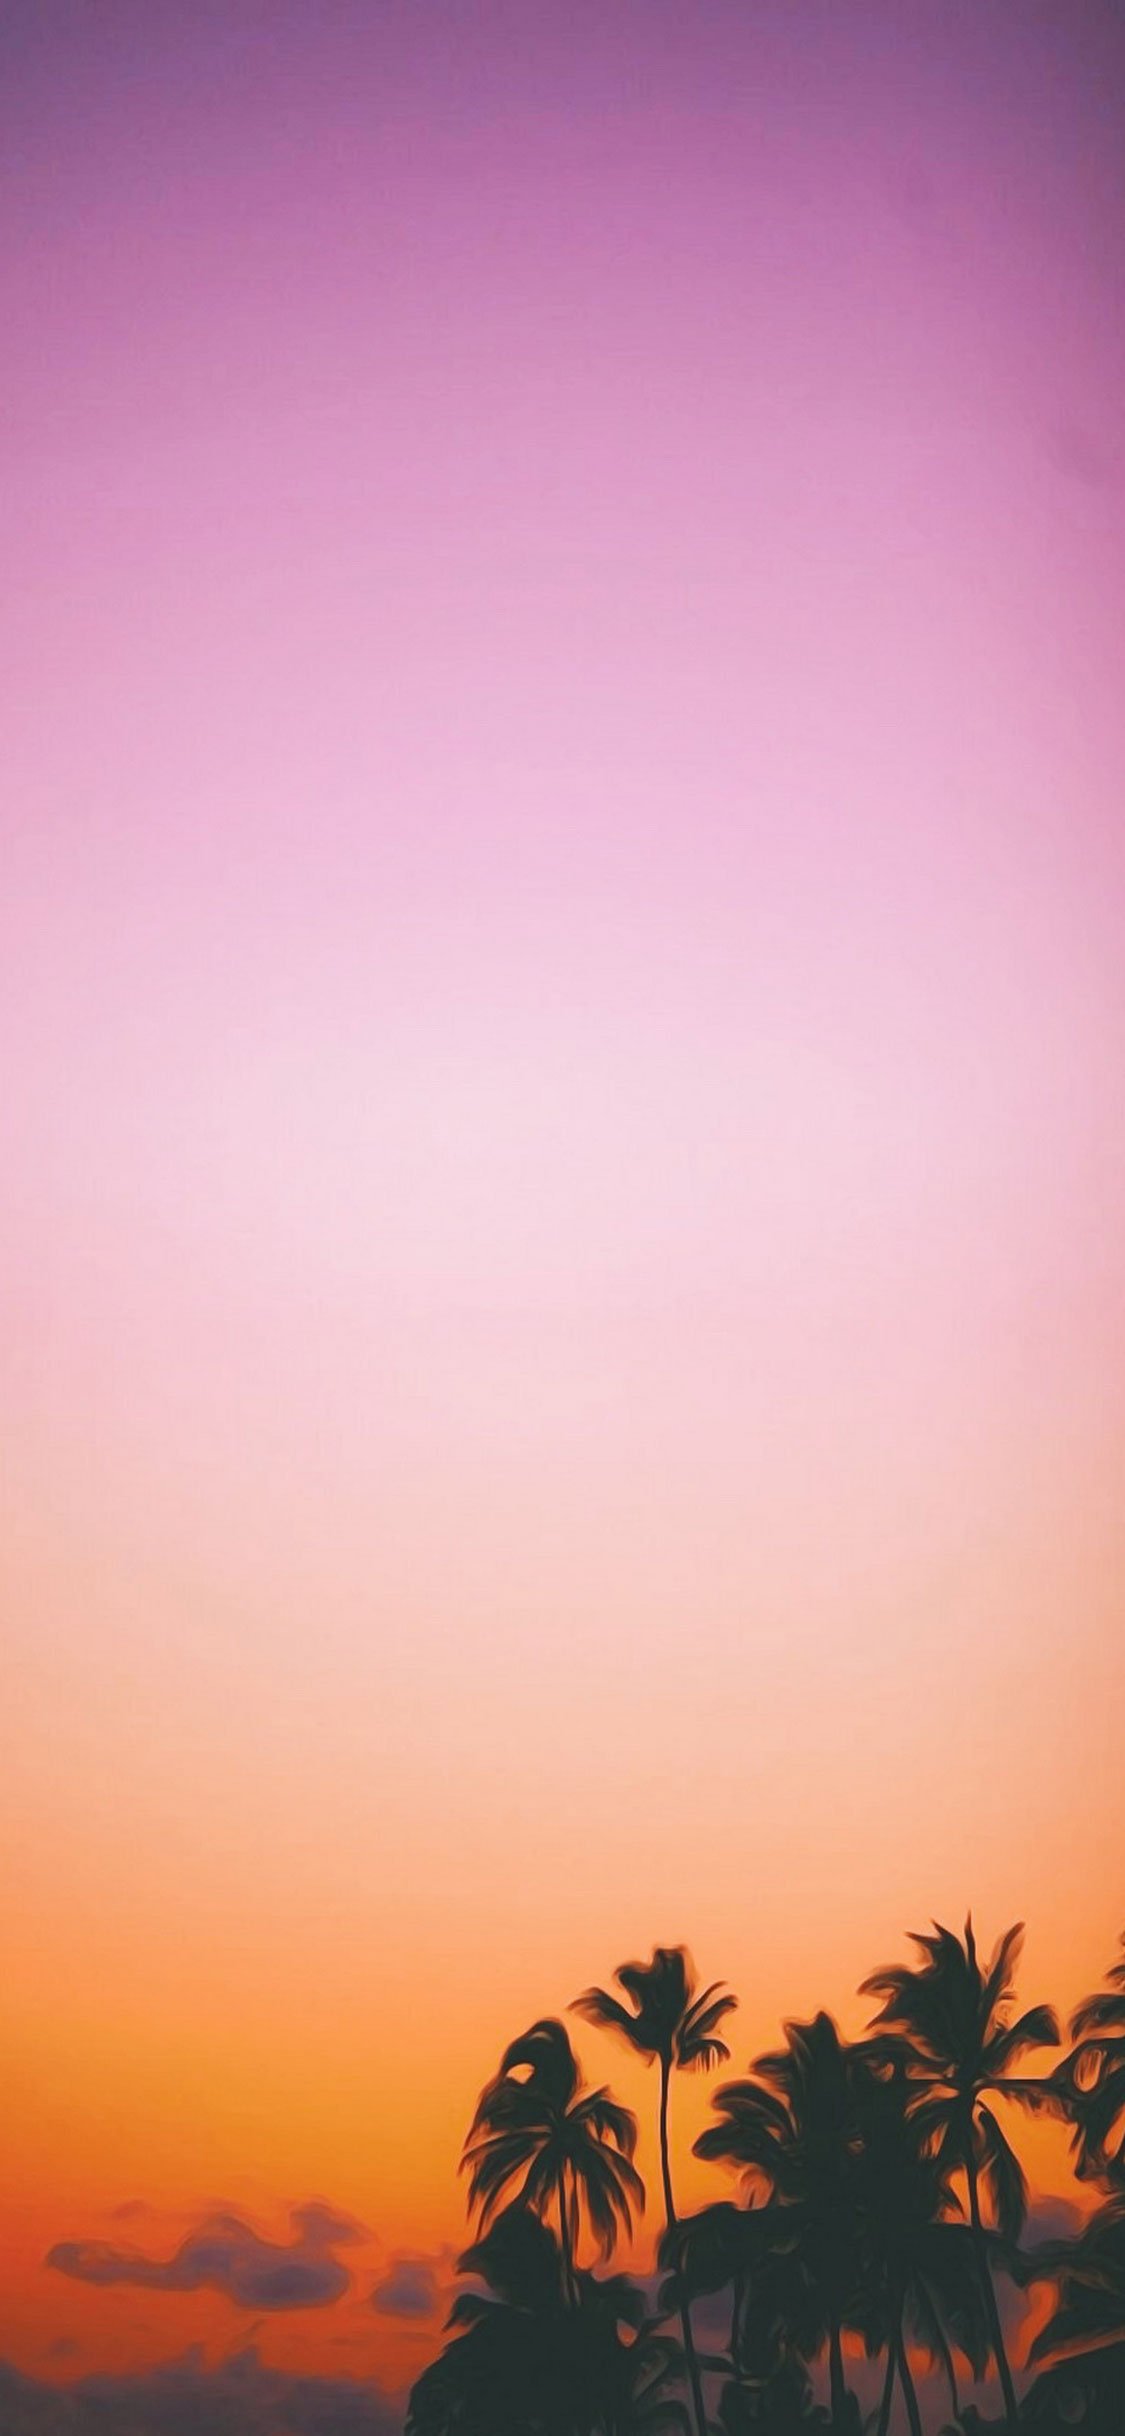 30  New Cool iPhone X Wallpapers \u0026 Backgrounds to freshen up your screen